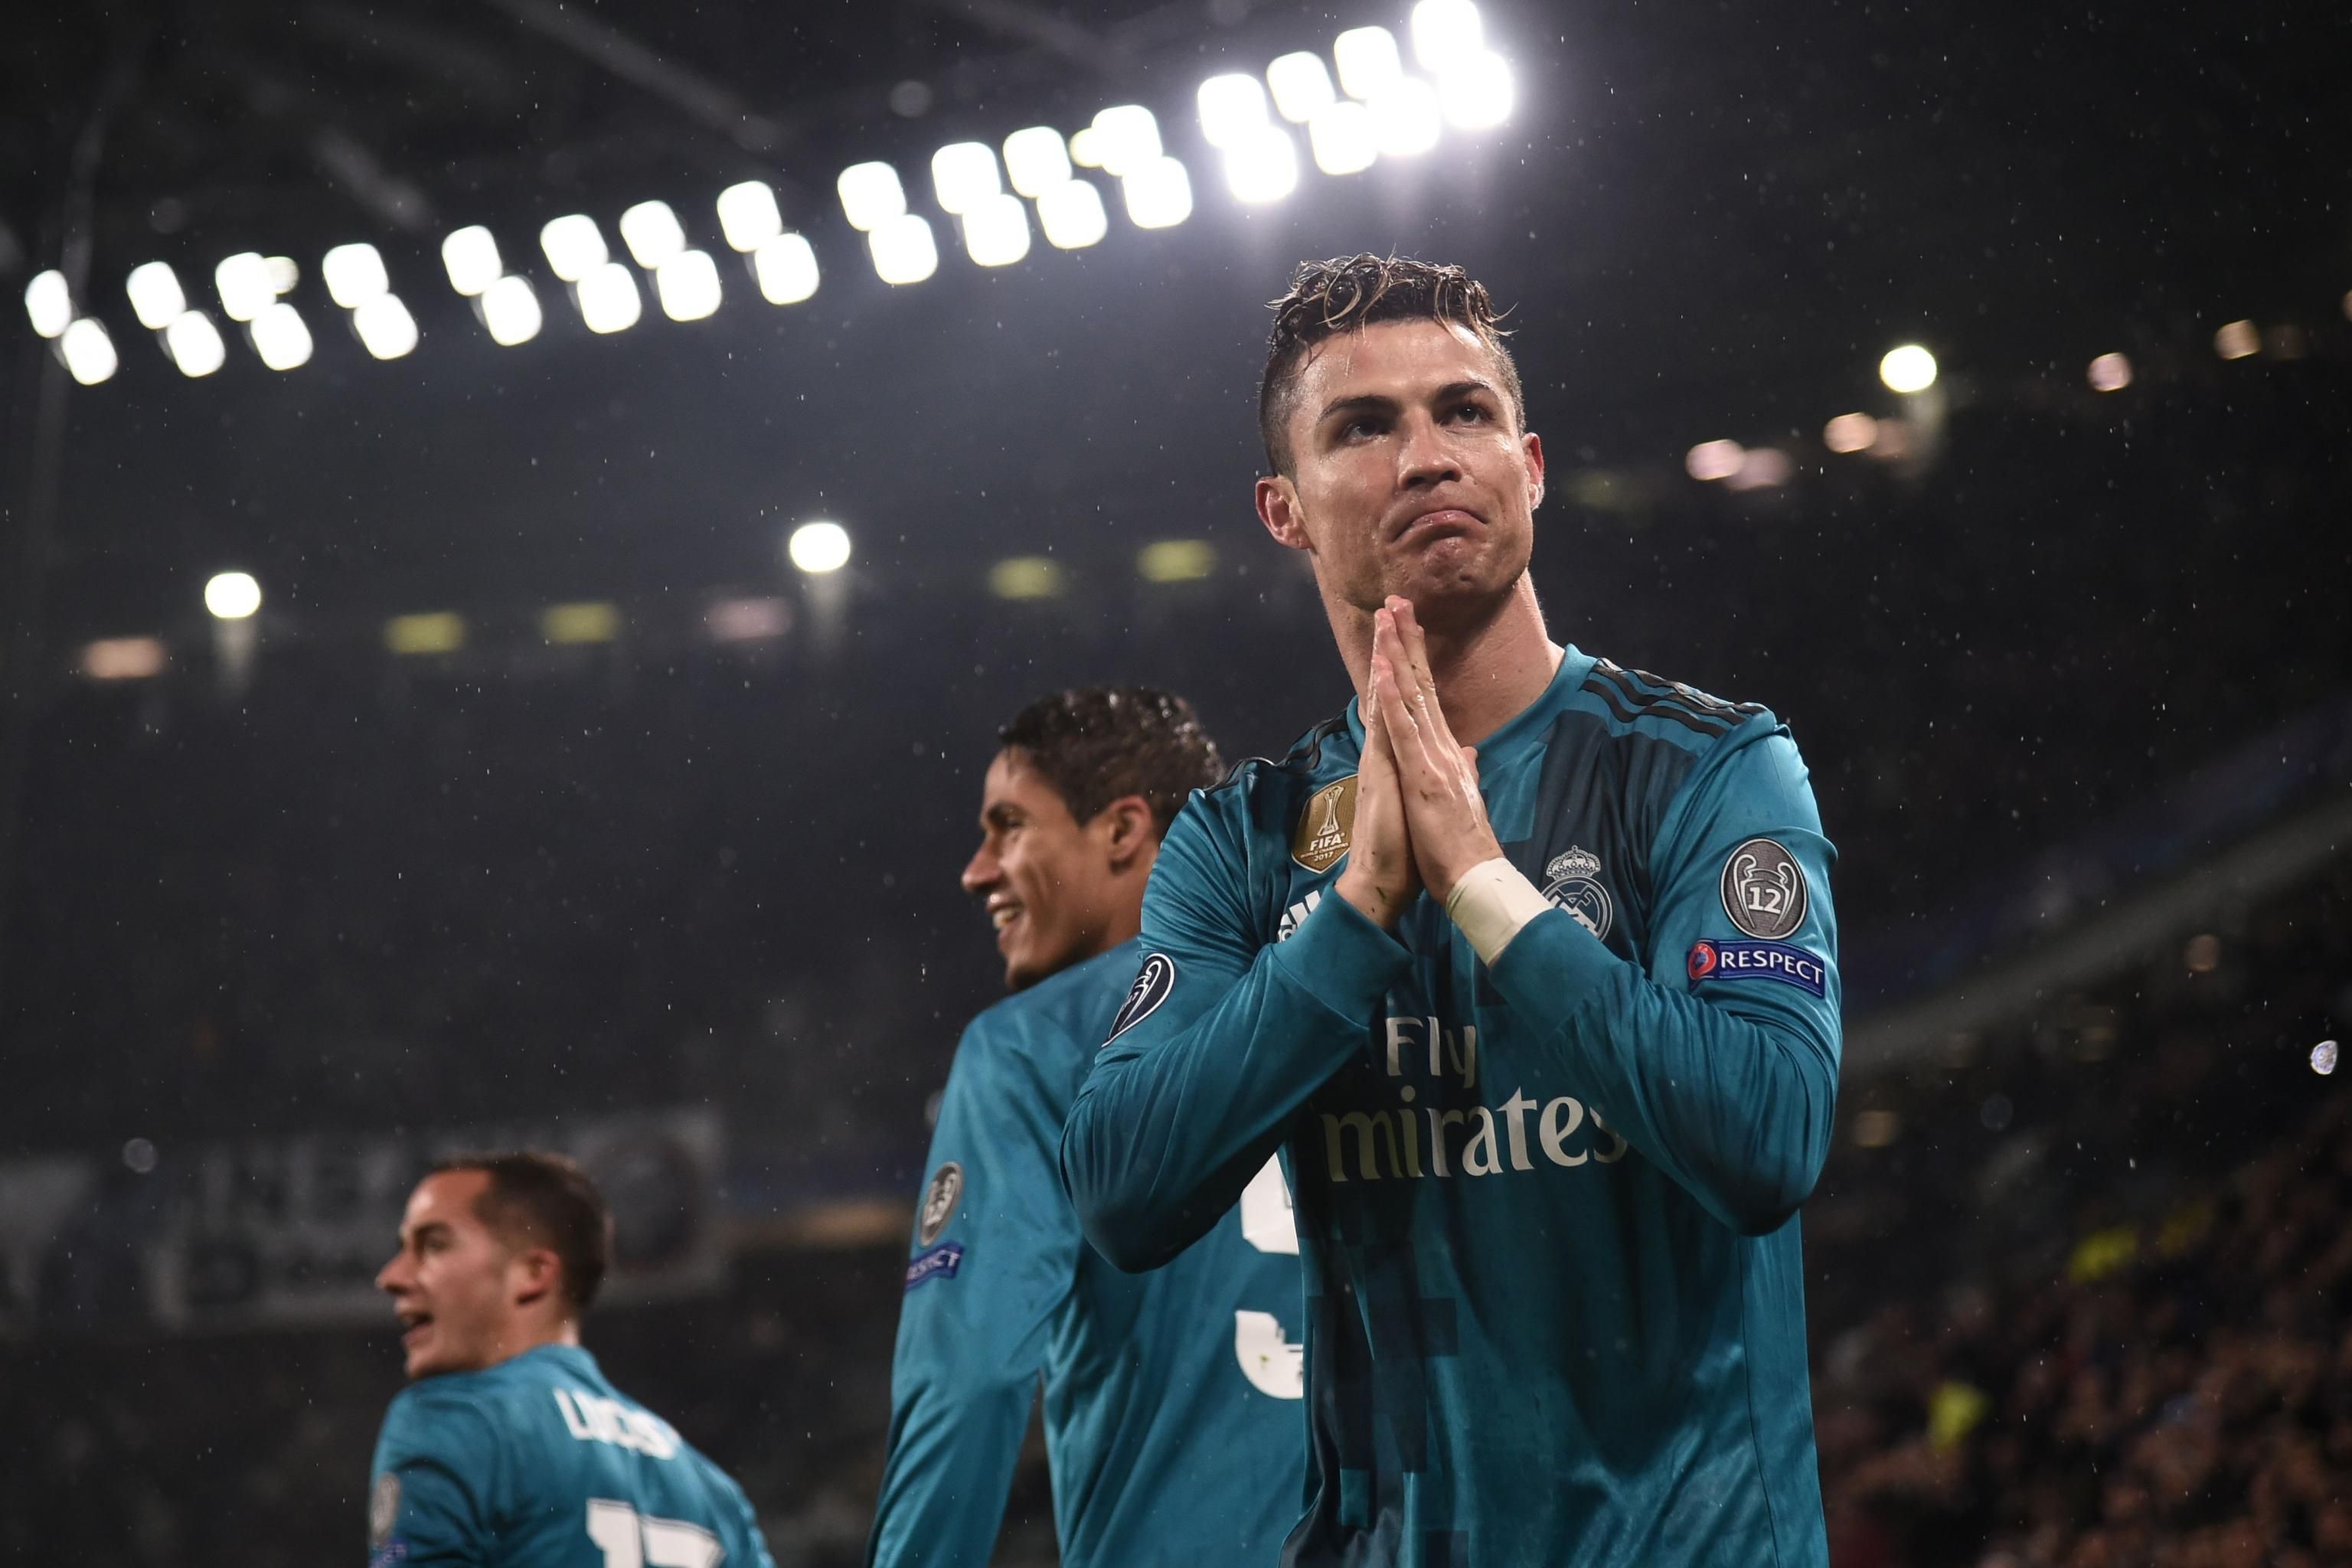 Cristiano Ronaldo Thanks Juventus Fans for Applause After Overhead